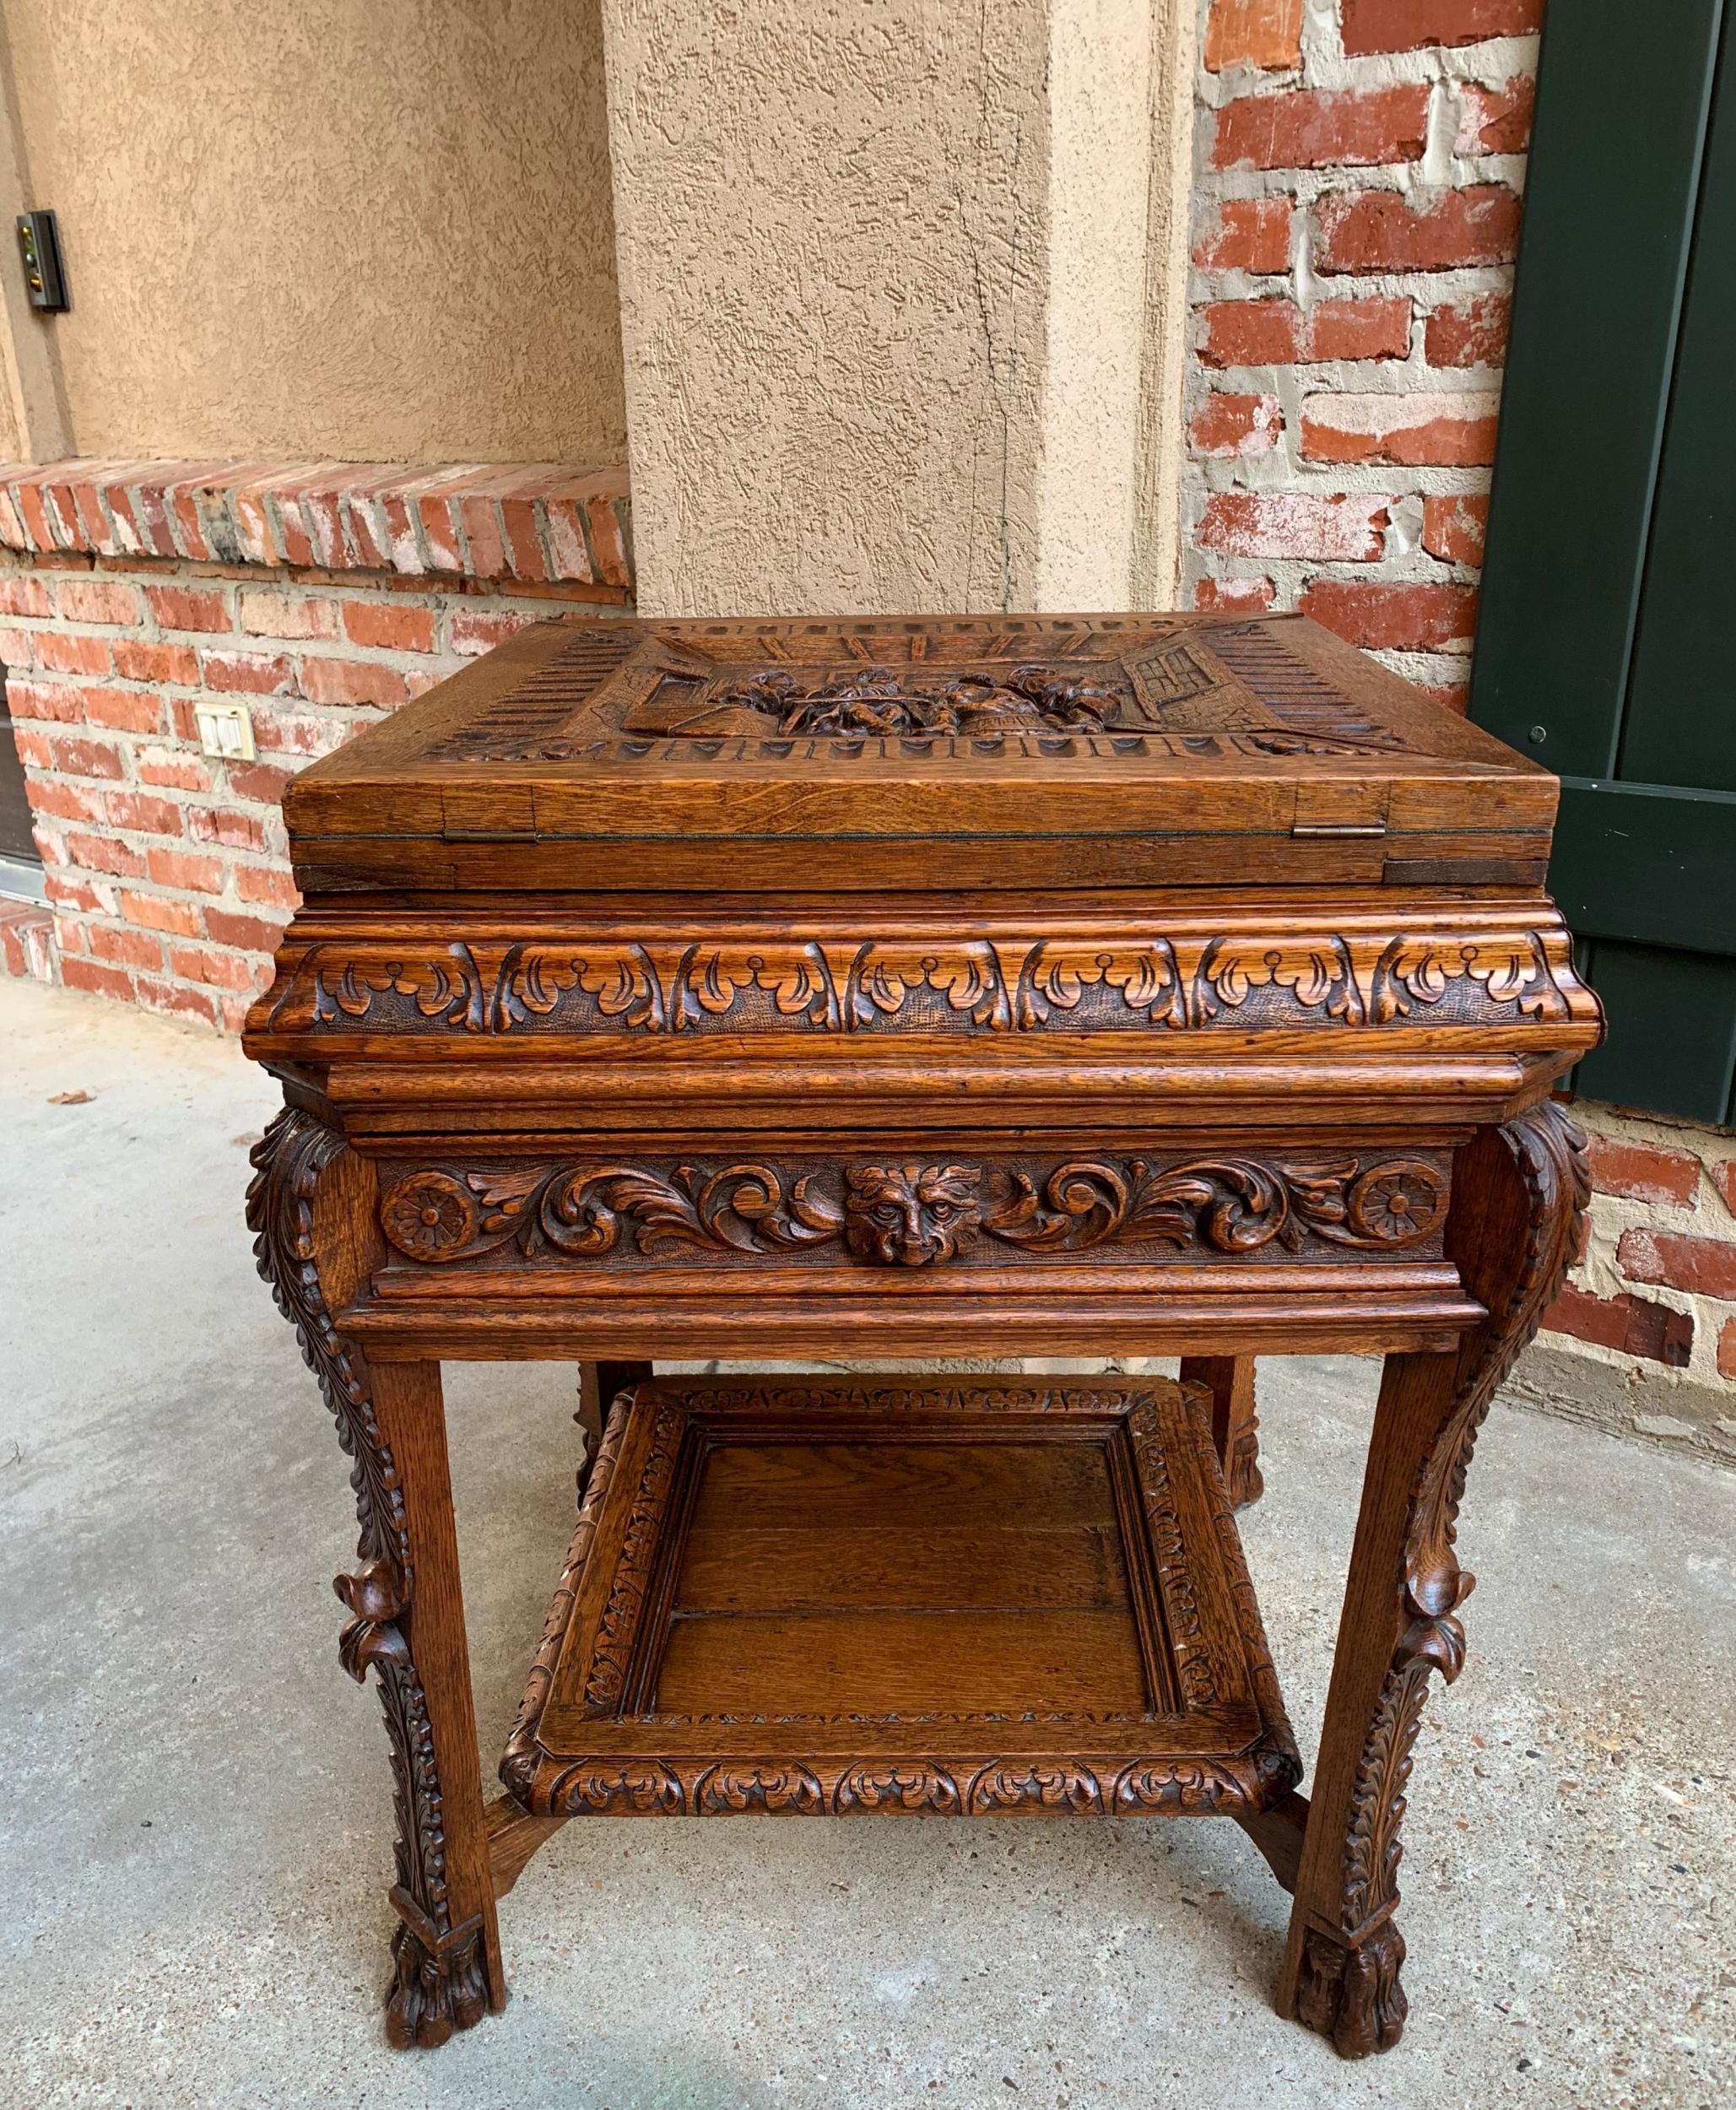 19th century French carved oak game table Breton Brittany flip top side table

~ Direct from France
~ Very unique, hand carved antique French flip top game table
~ Brittany carved scene on the top panels, in true Breton style, depicting four men